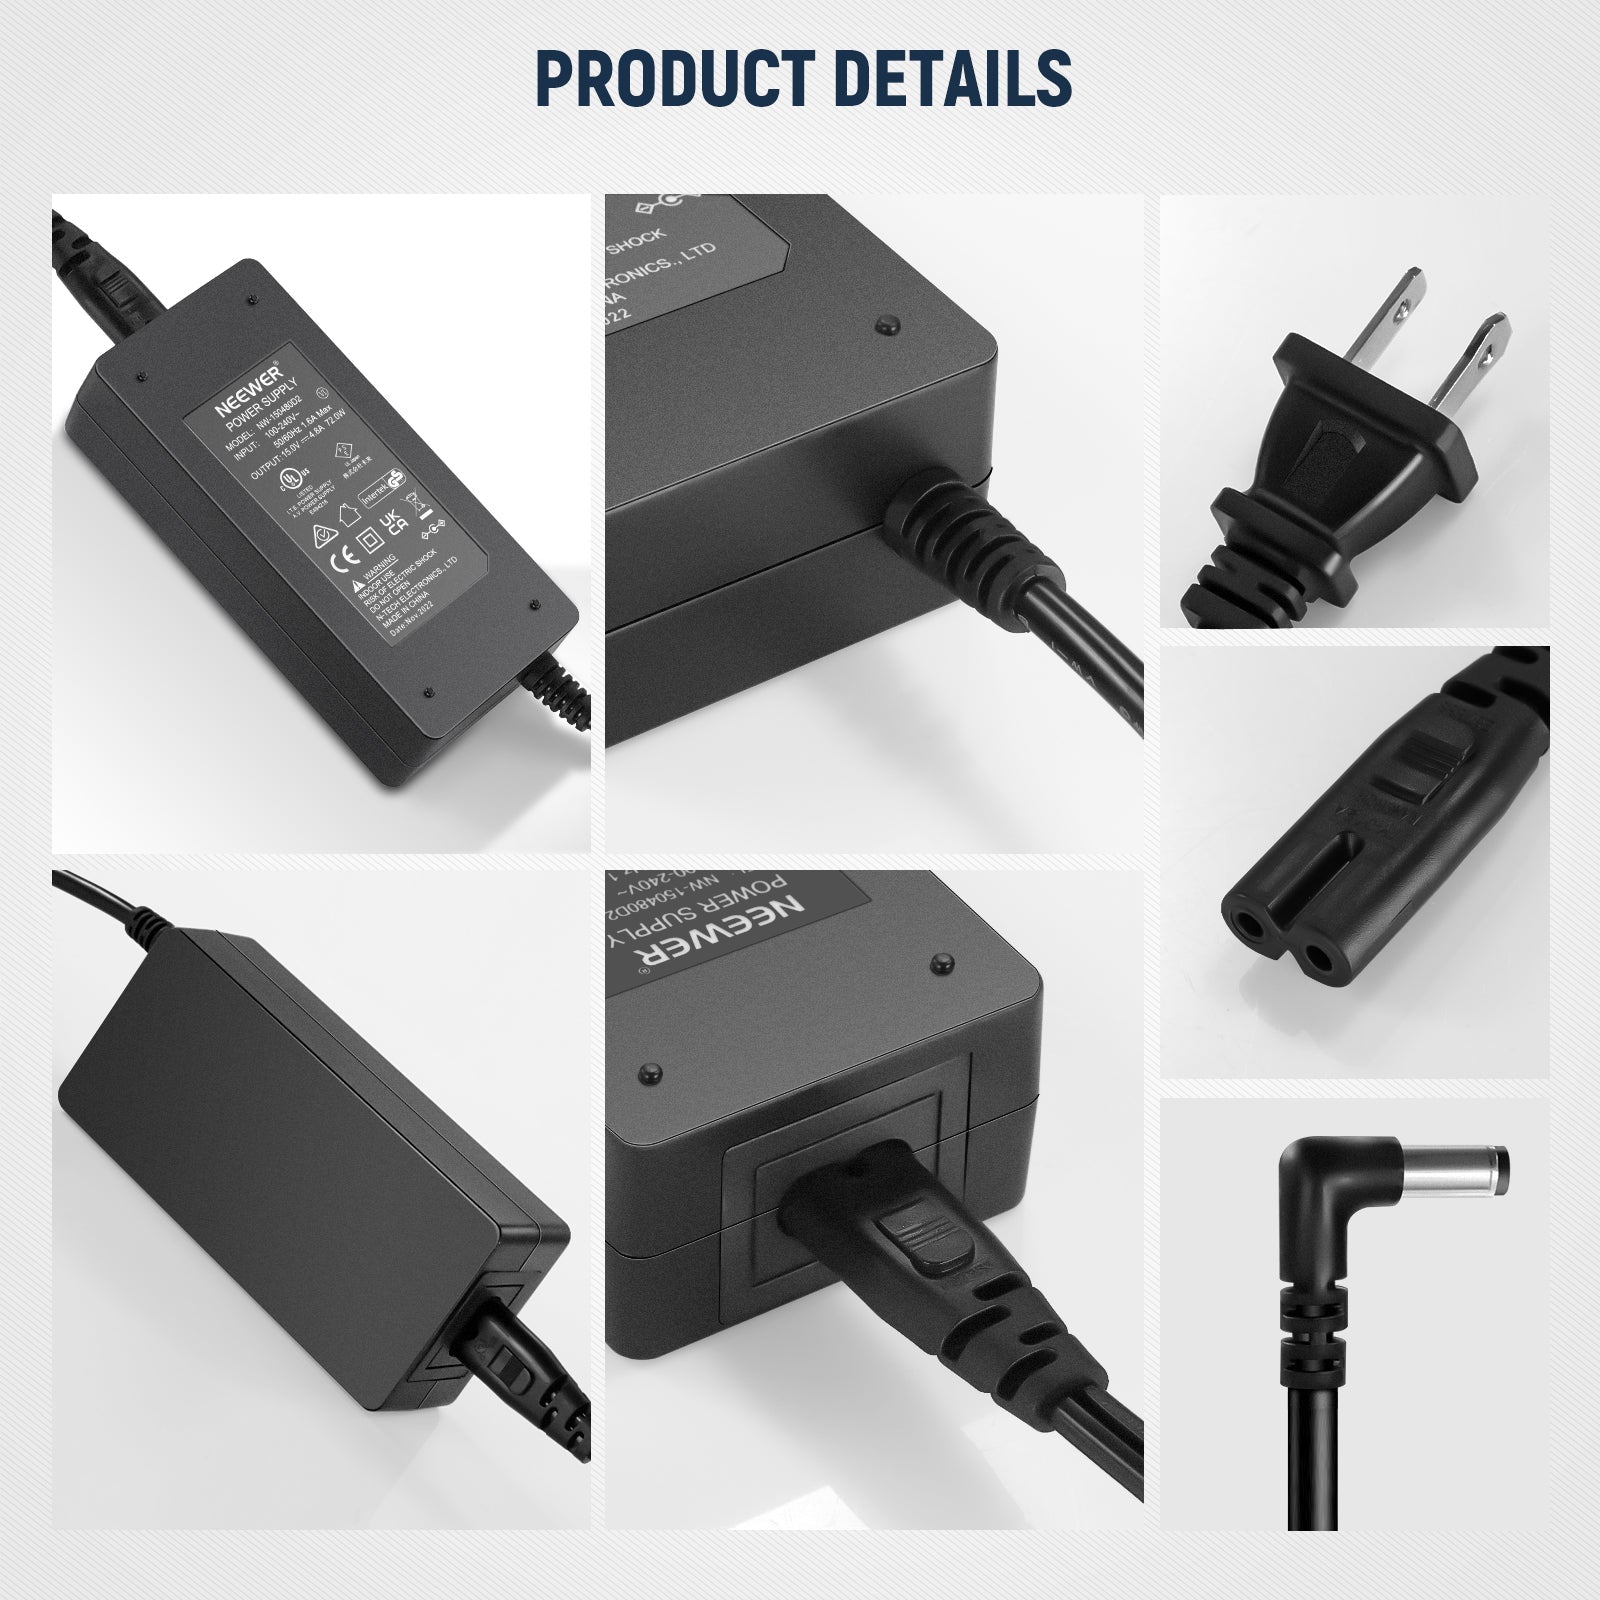 NEEWER AC 100-240V to DC 12V Power Supply Adapter - NEEWER